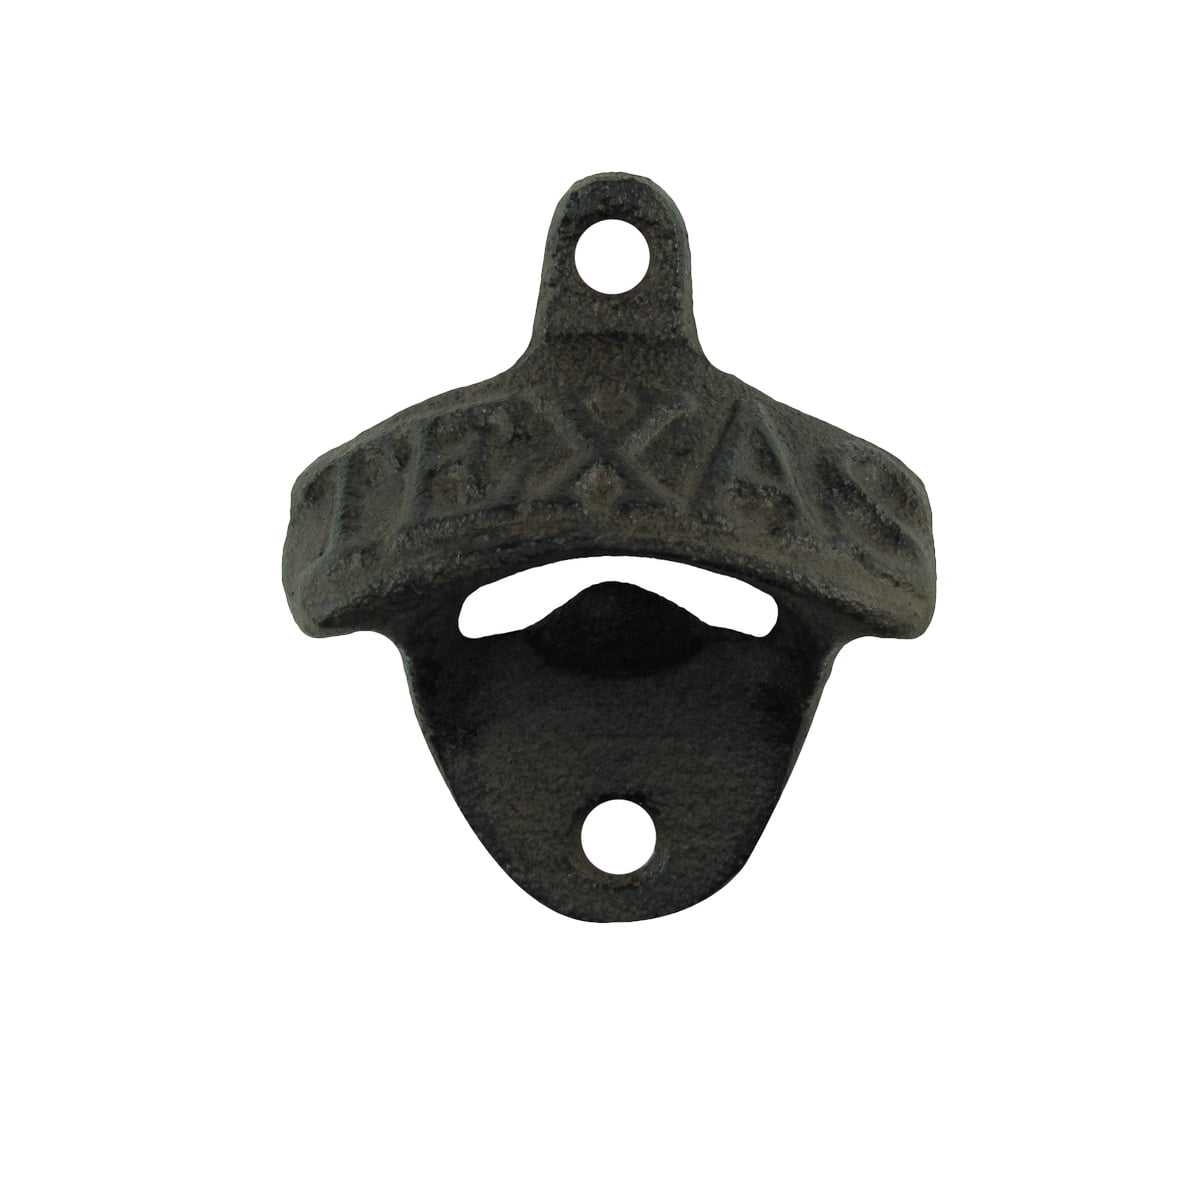 NEW! Man Cave Cast Iron Wall Mount Bottle Opener by Holiday Beer Party 